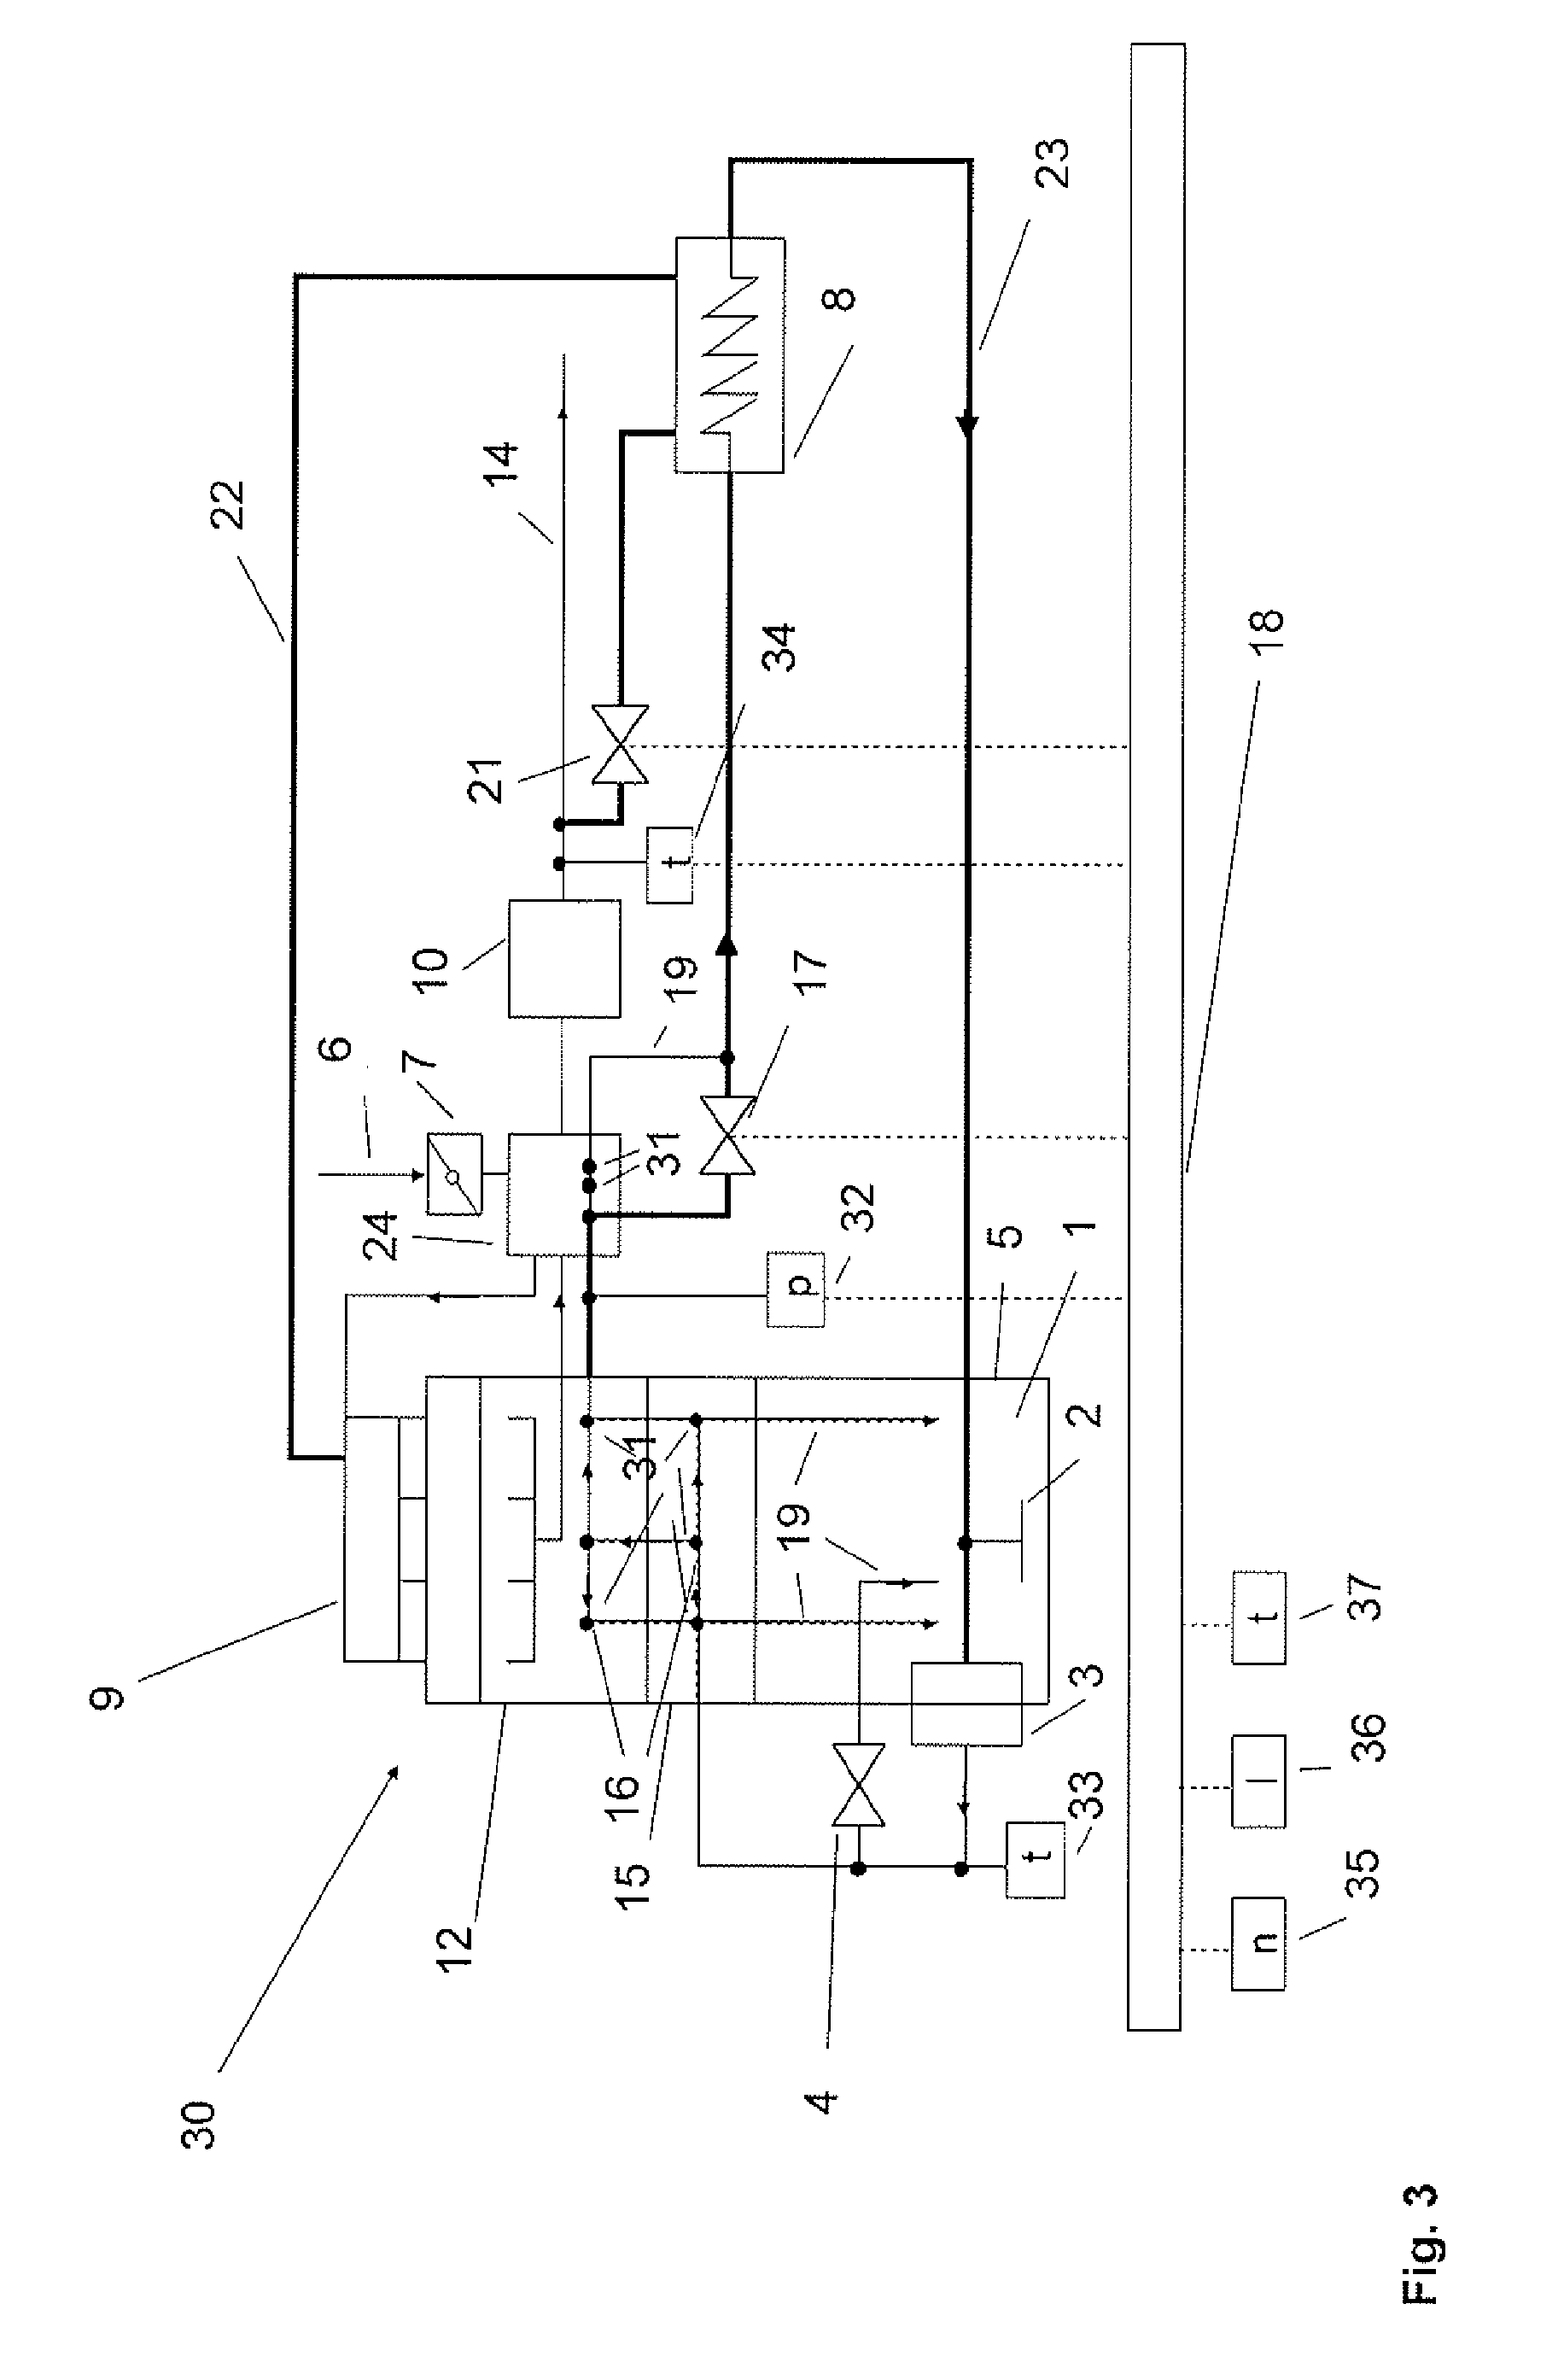 Method and apparatus for oiling rotating or oscillating components